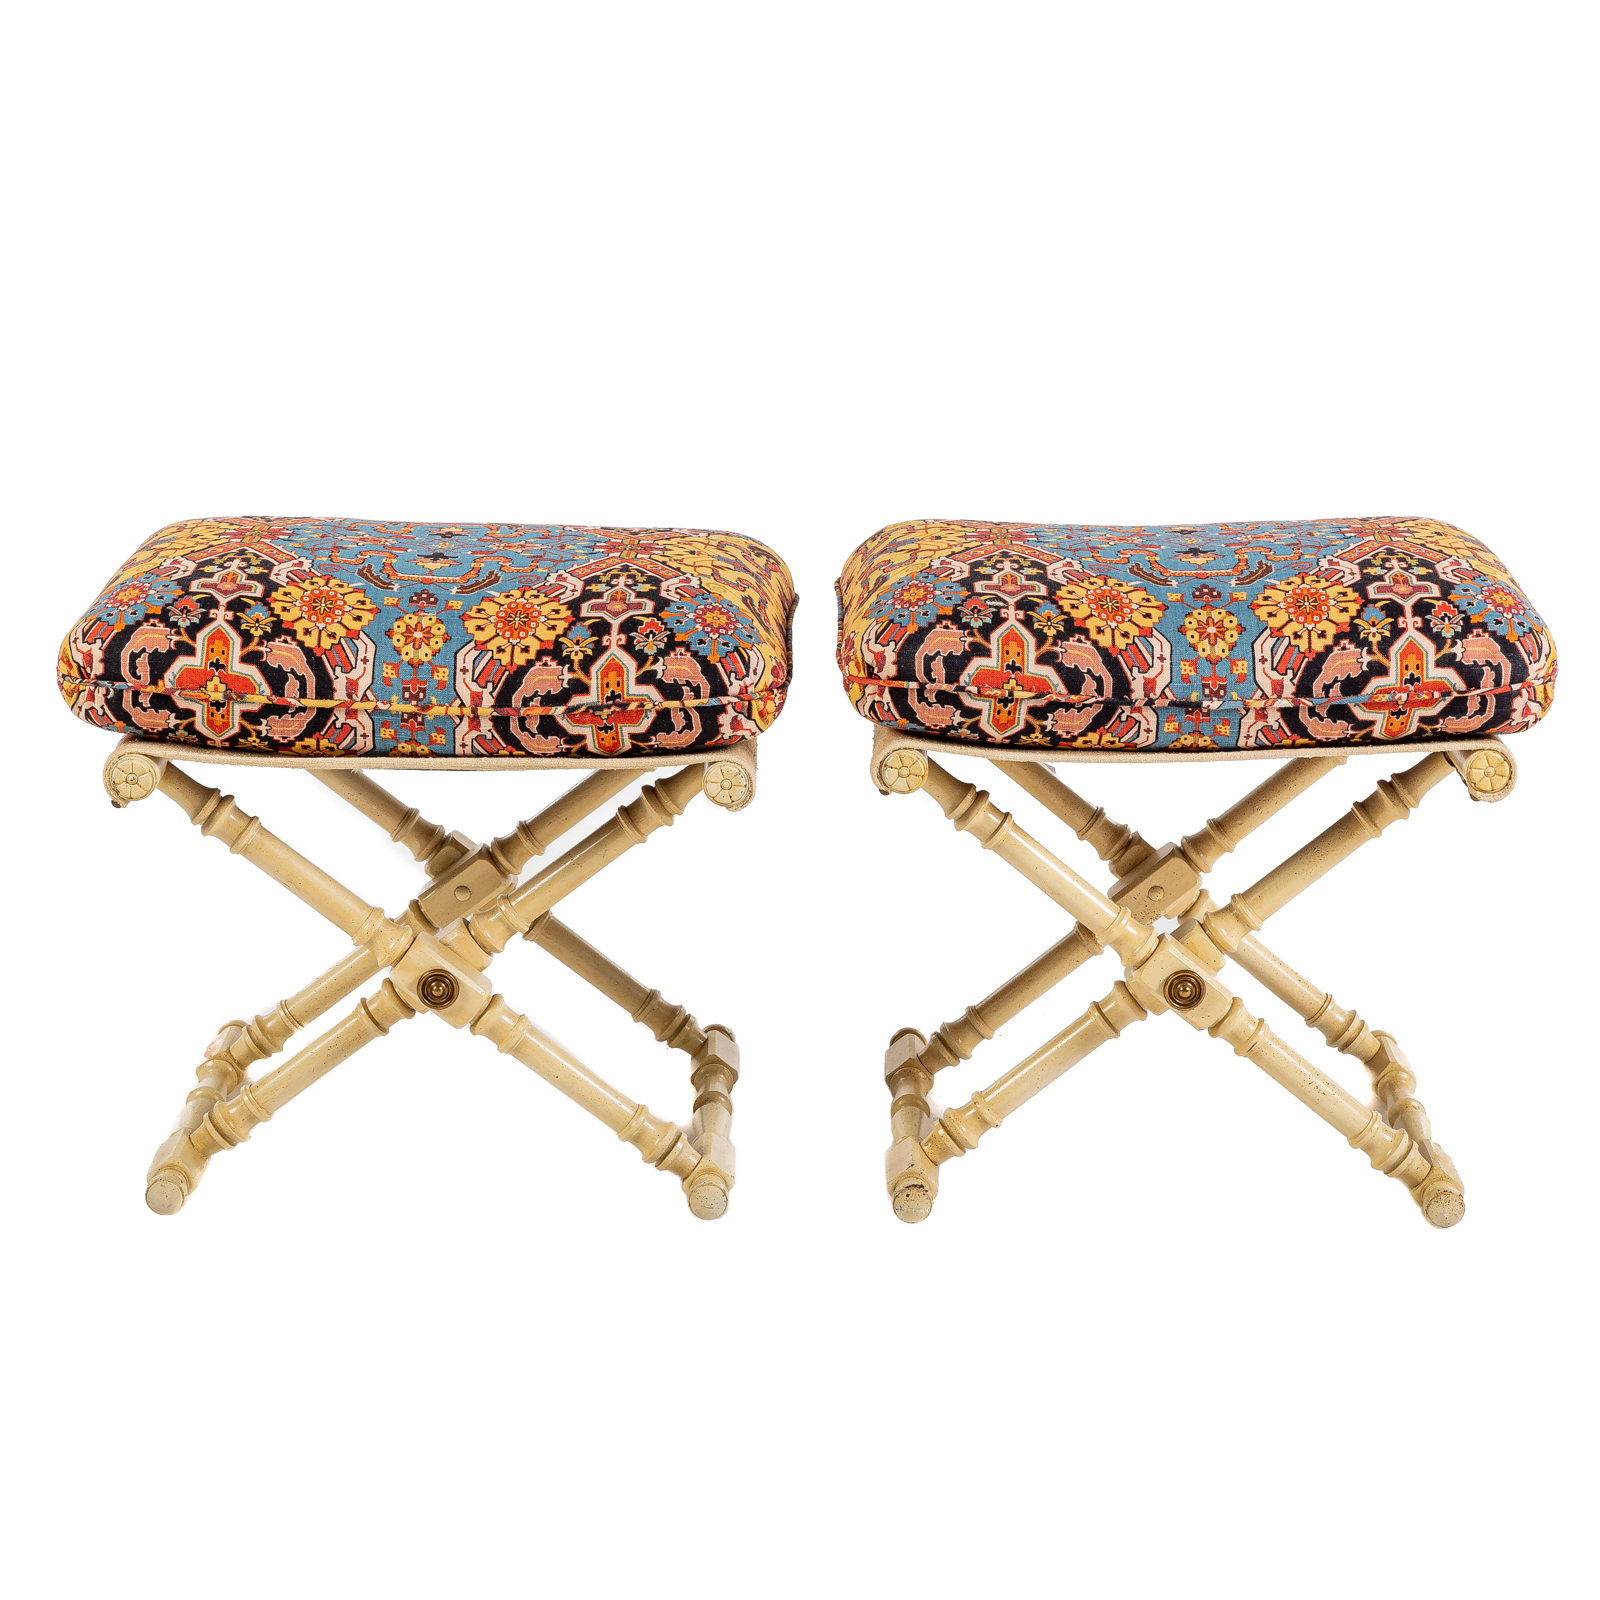 A PAIR OF PAINTED WOOD UPHOLSTERED